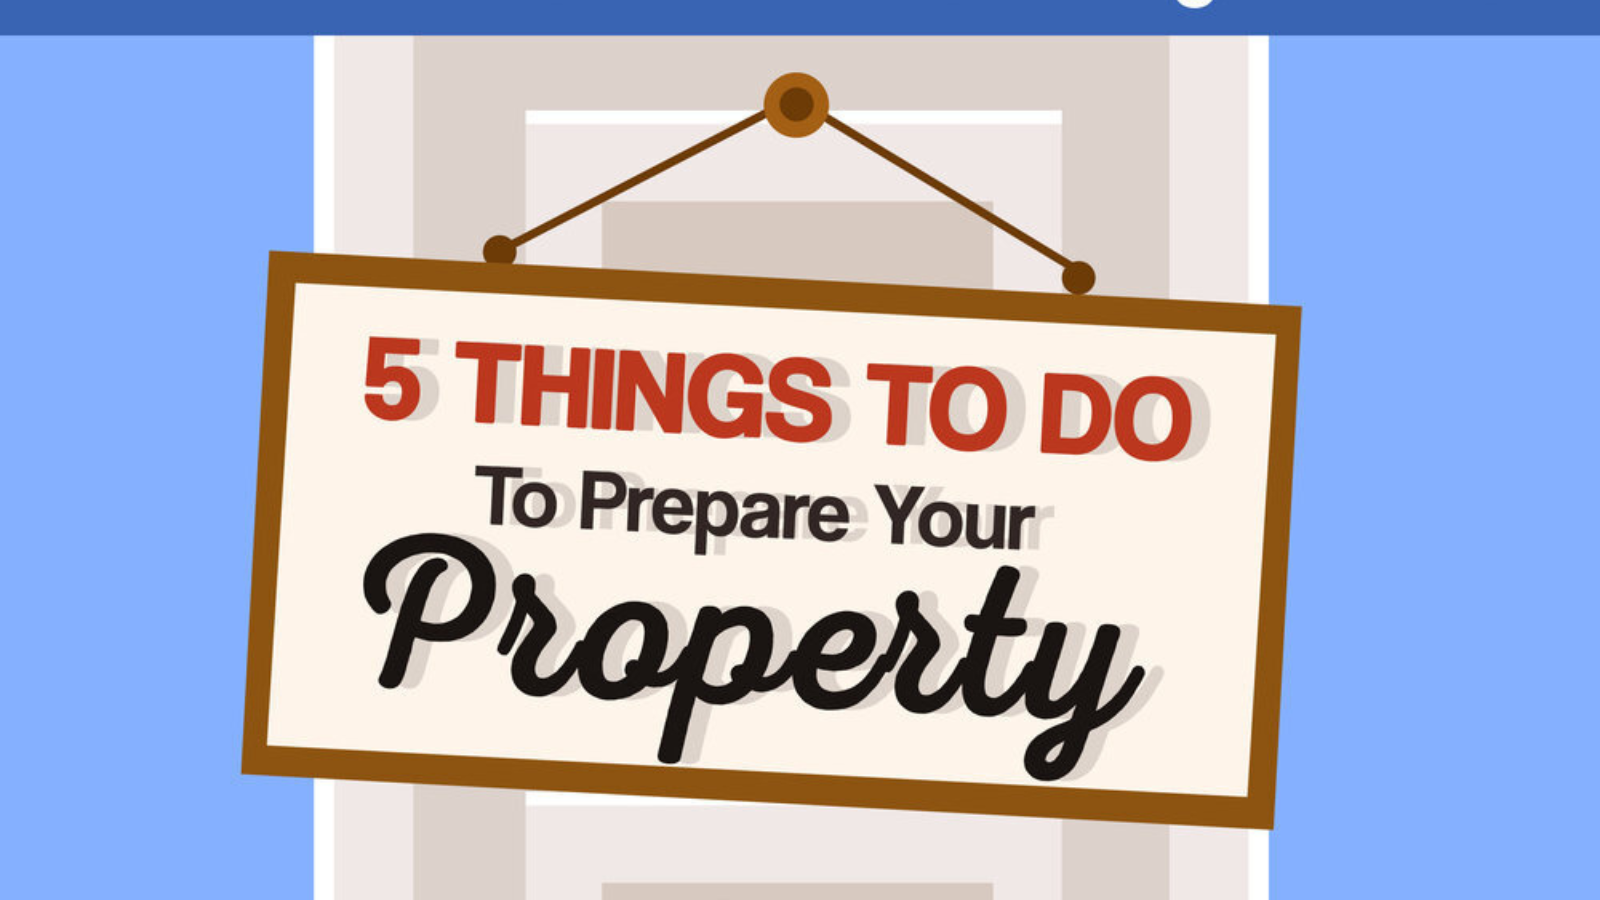 The Pet Owner's Guide To Selling A Home: 5 Things To Do To Prepare Your Property